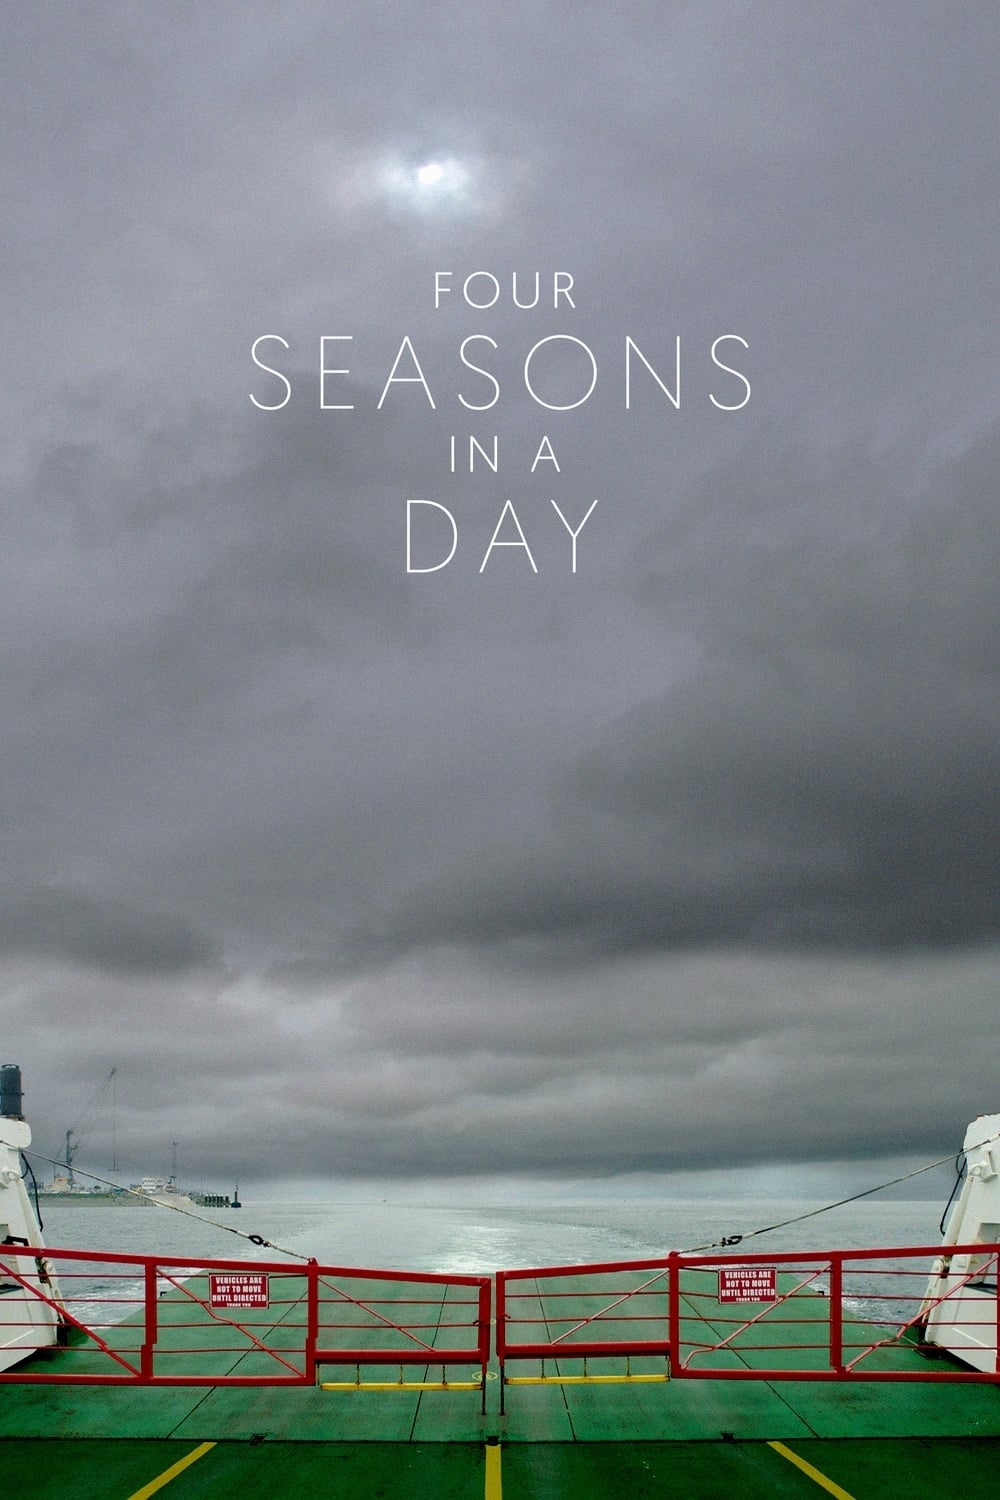 Four Seasons in a Day